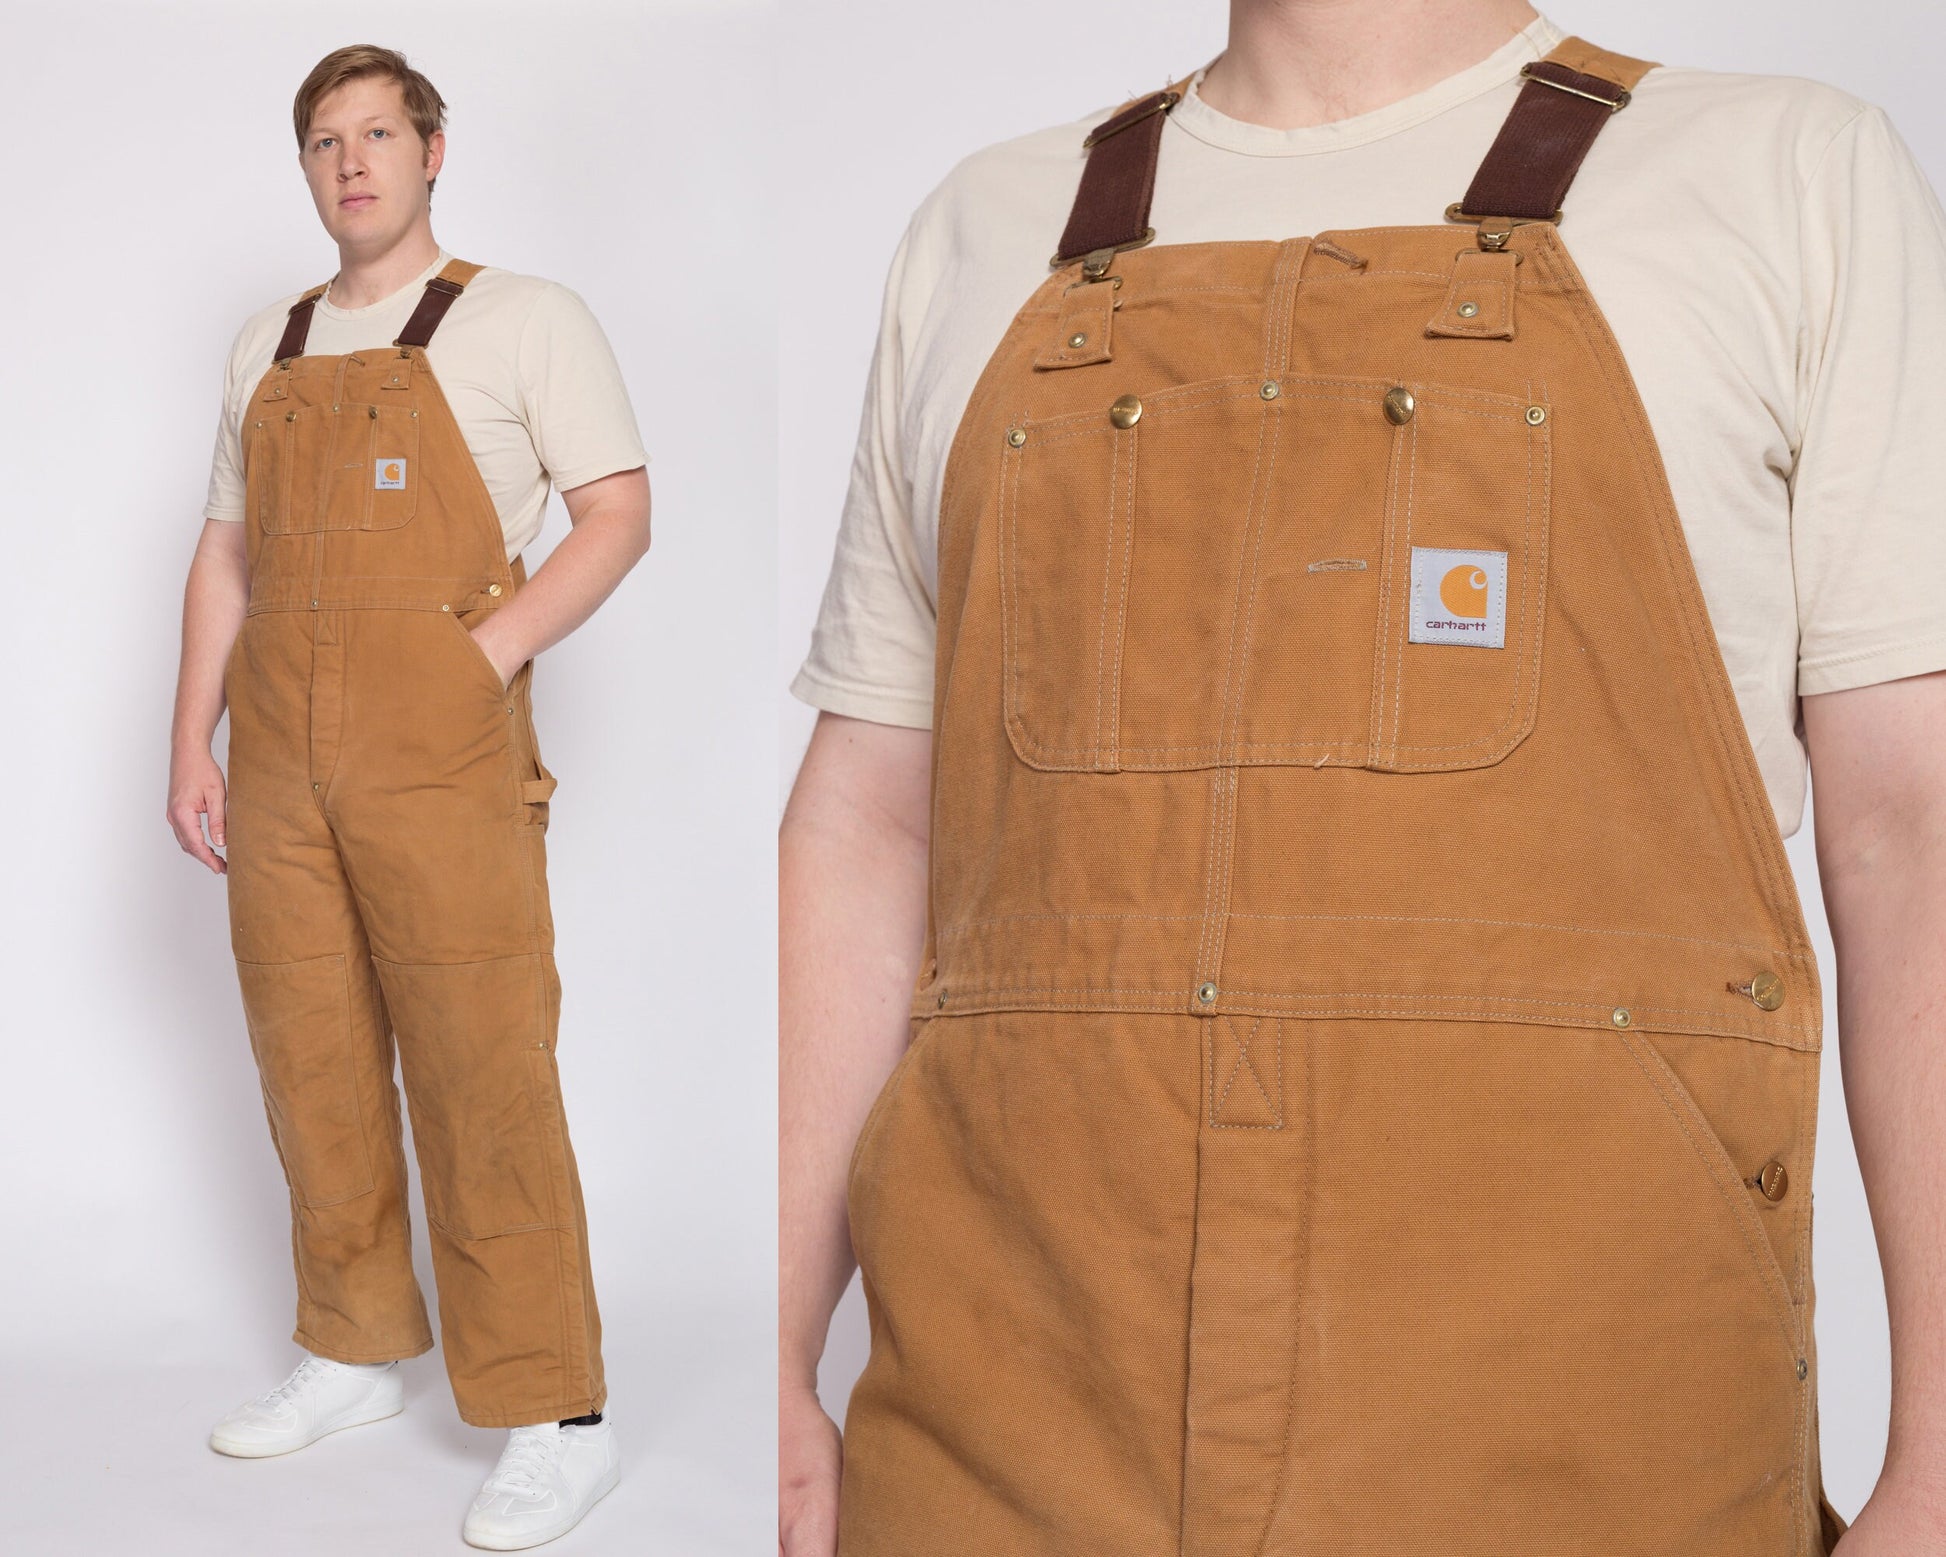 Vintage Carhartt Insulated Quilt Lined Overalls - 44x31 | 90s Y2K Duck Canvas Tan Workwear Jumpsuit